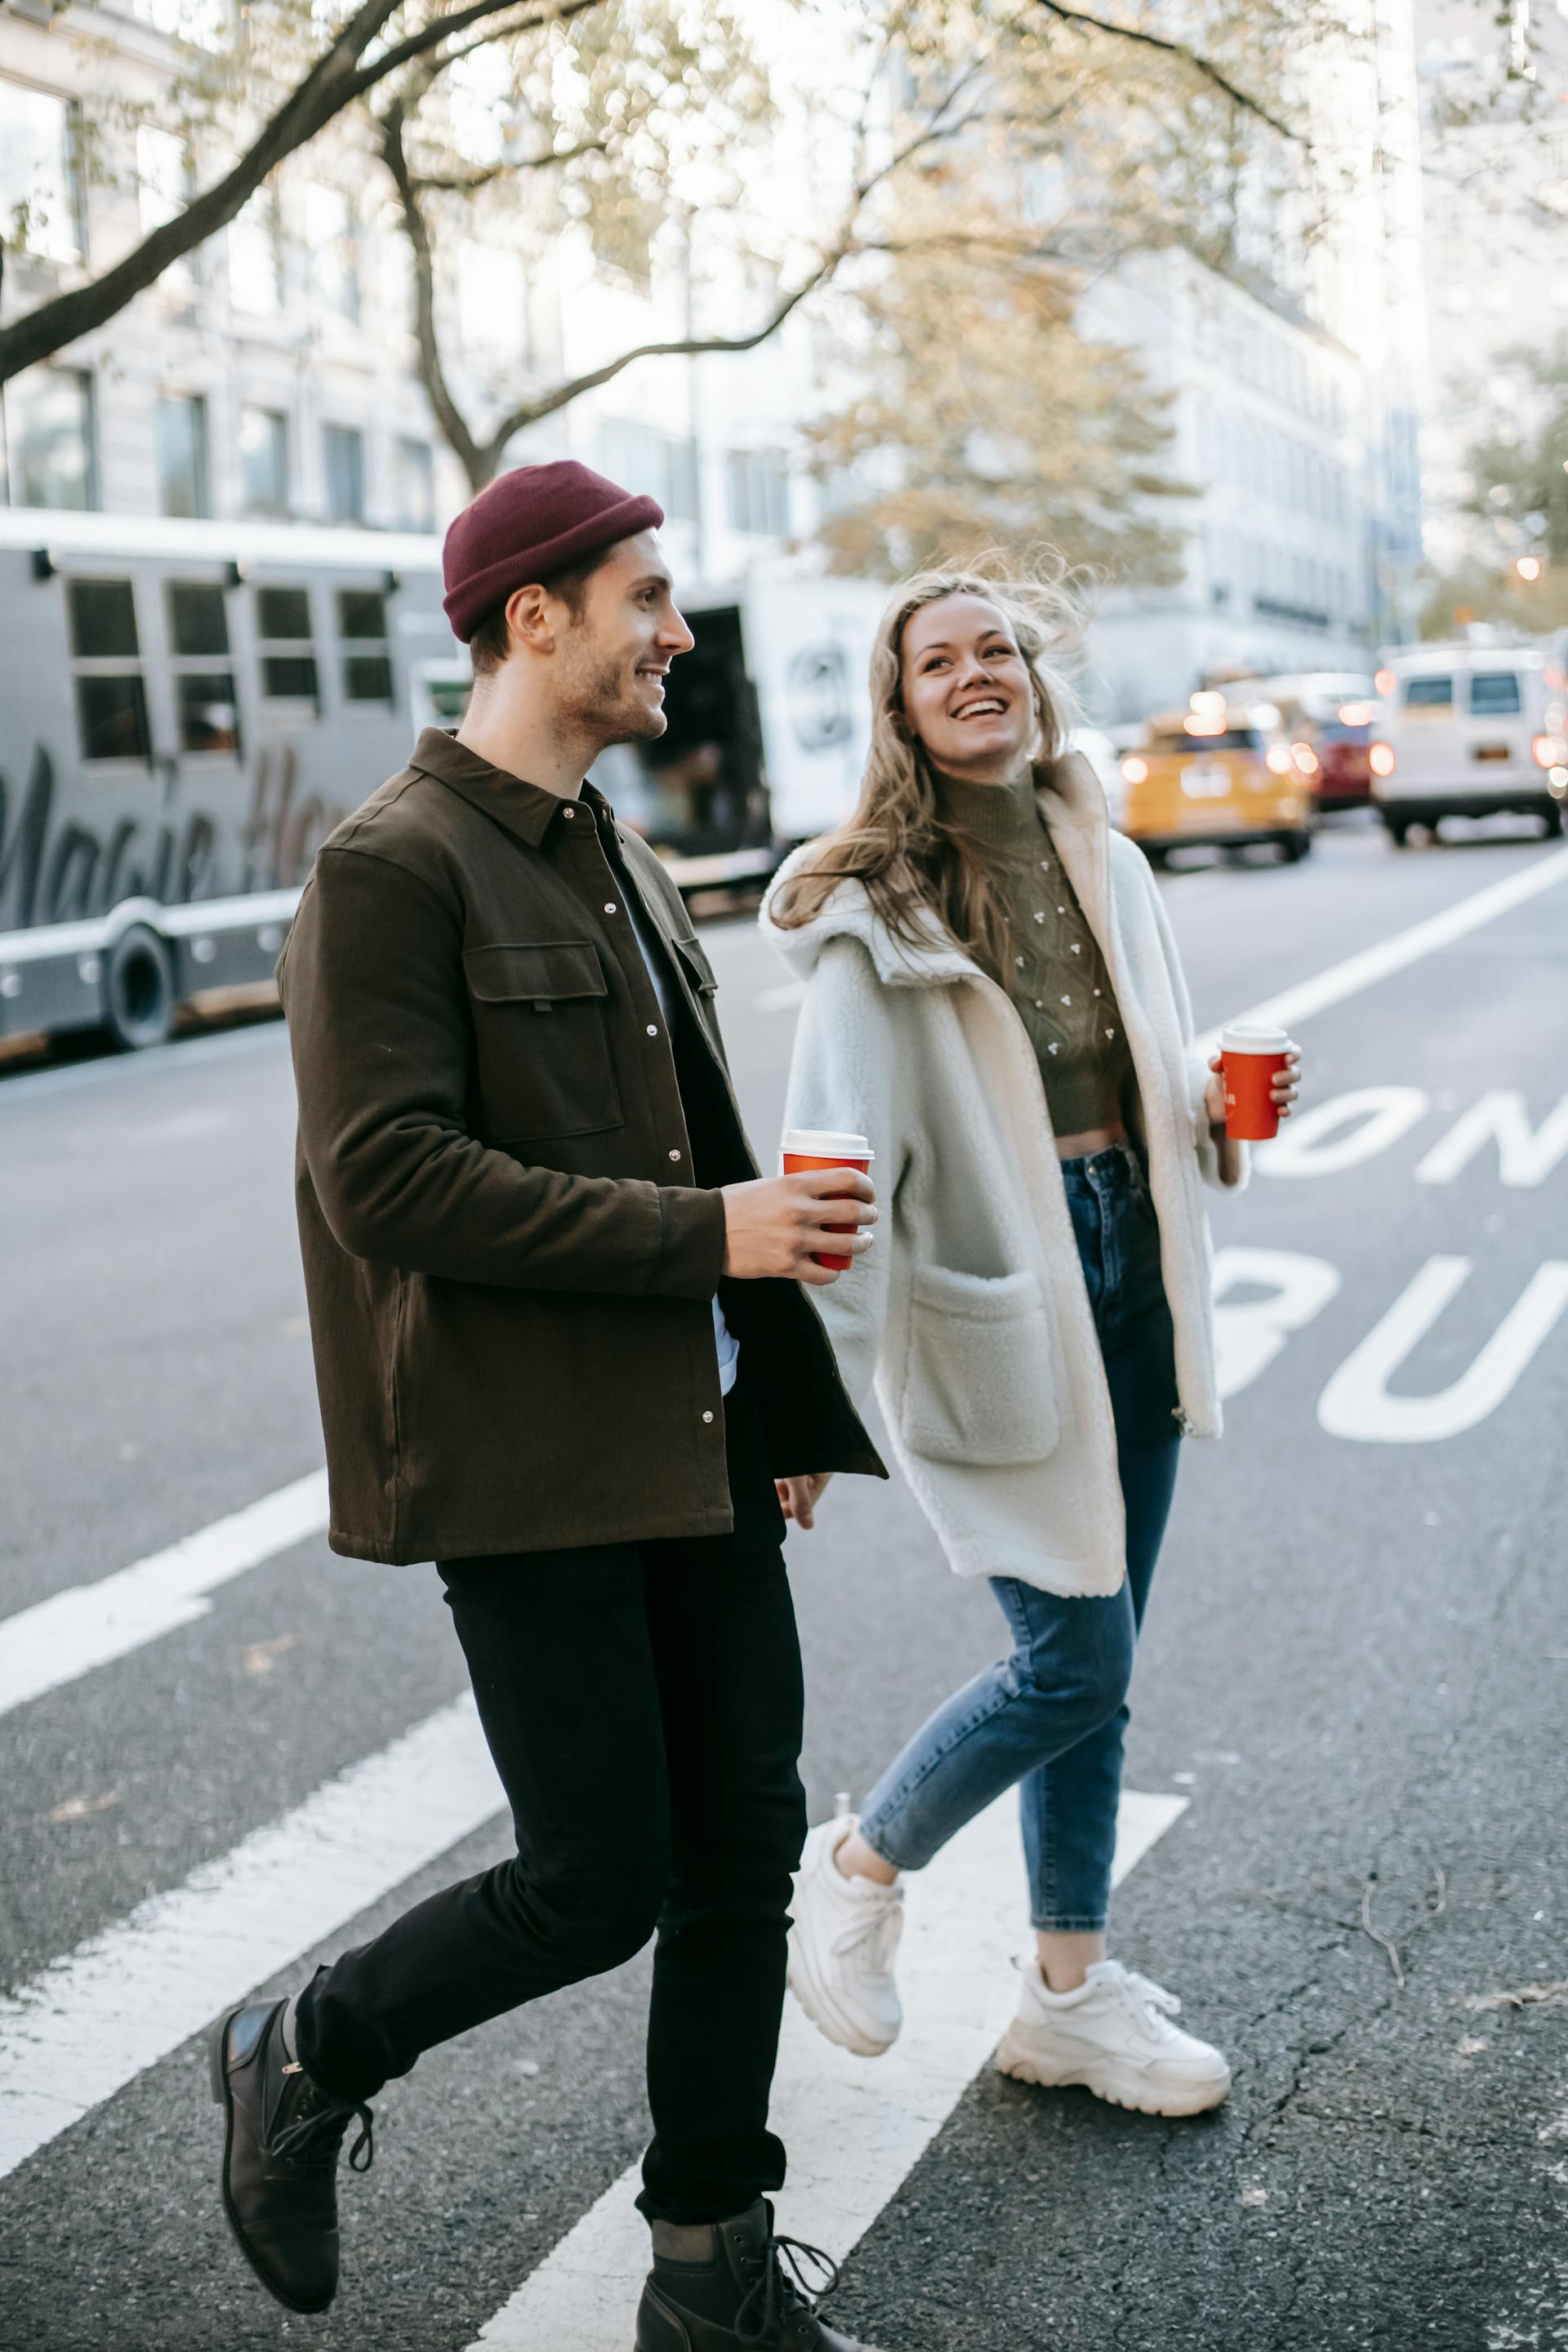 A couple walking on the street with coffee cups | Source: Pexels